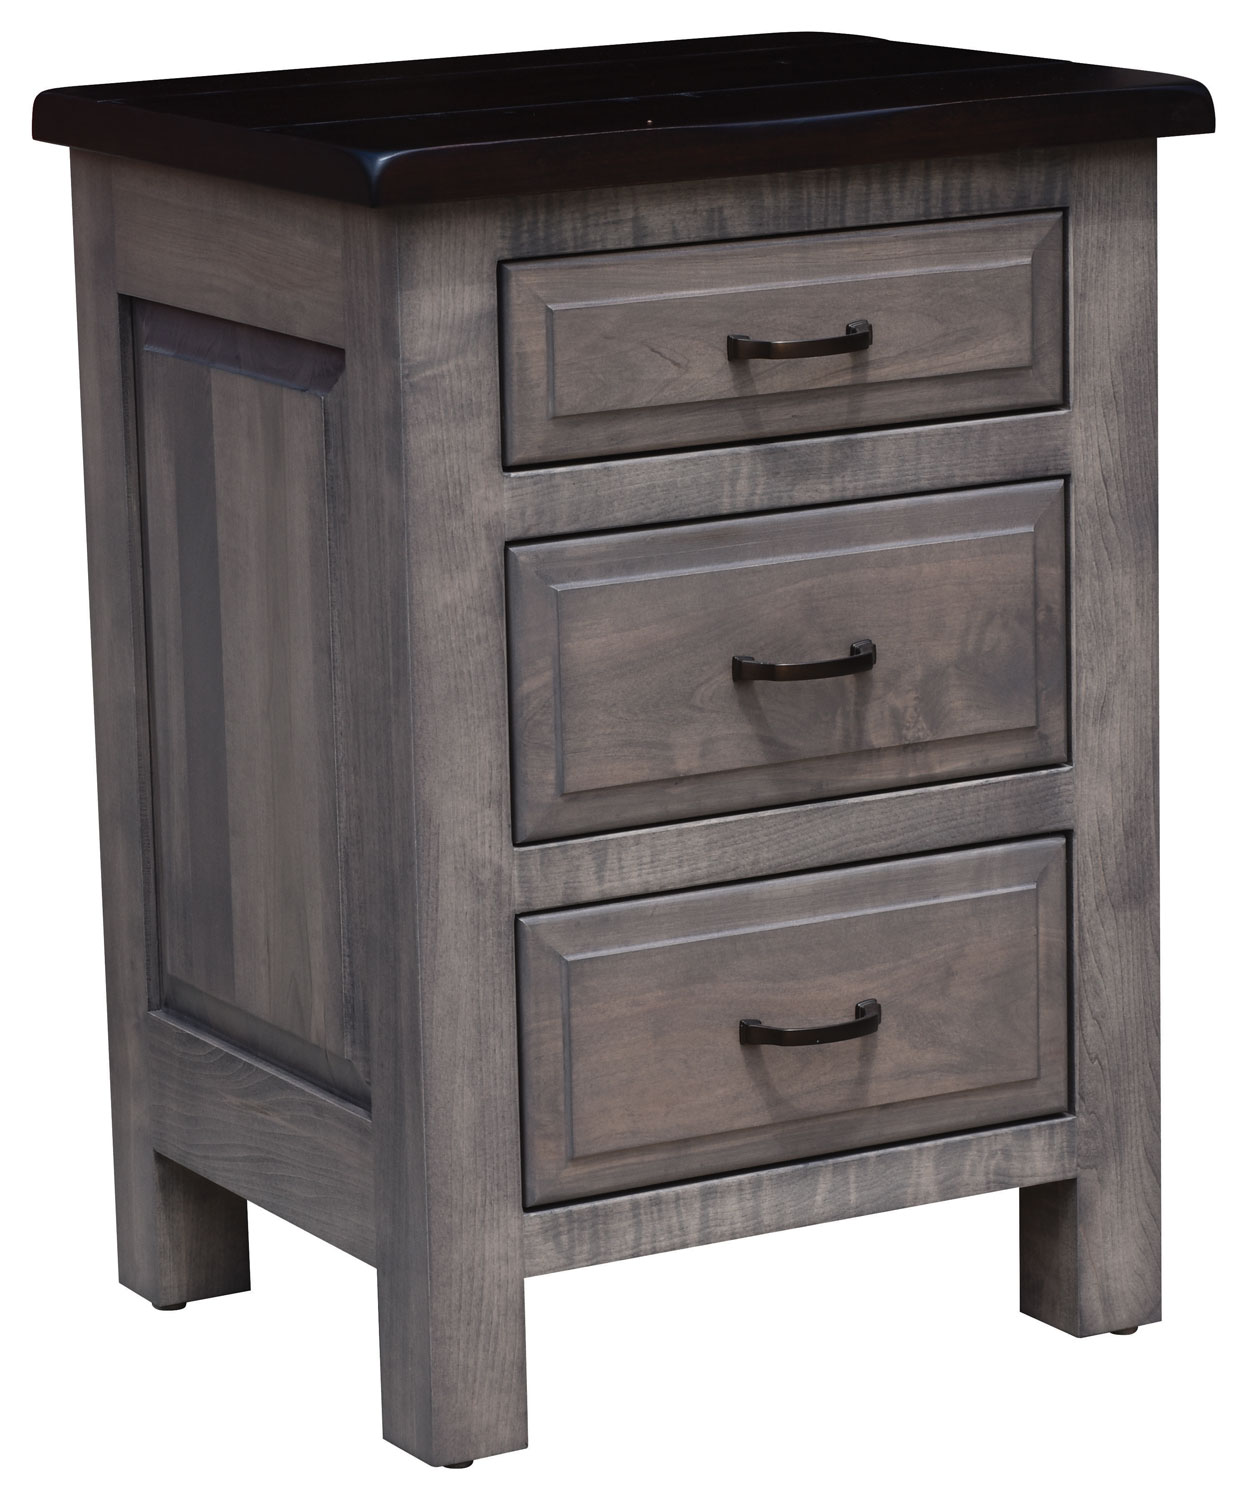 Cleveland 3-Drawer Nightstand shown in Brown Maple on Base with Driftwood and Rustic Cherry Hand planked top with OCS-228 Rich Tobacco Finish.